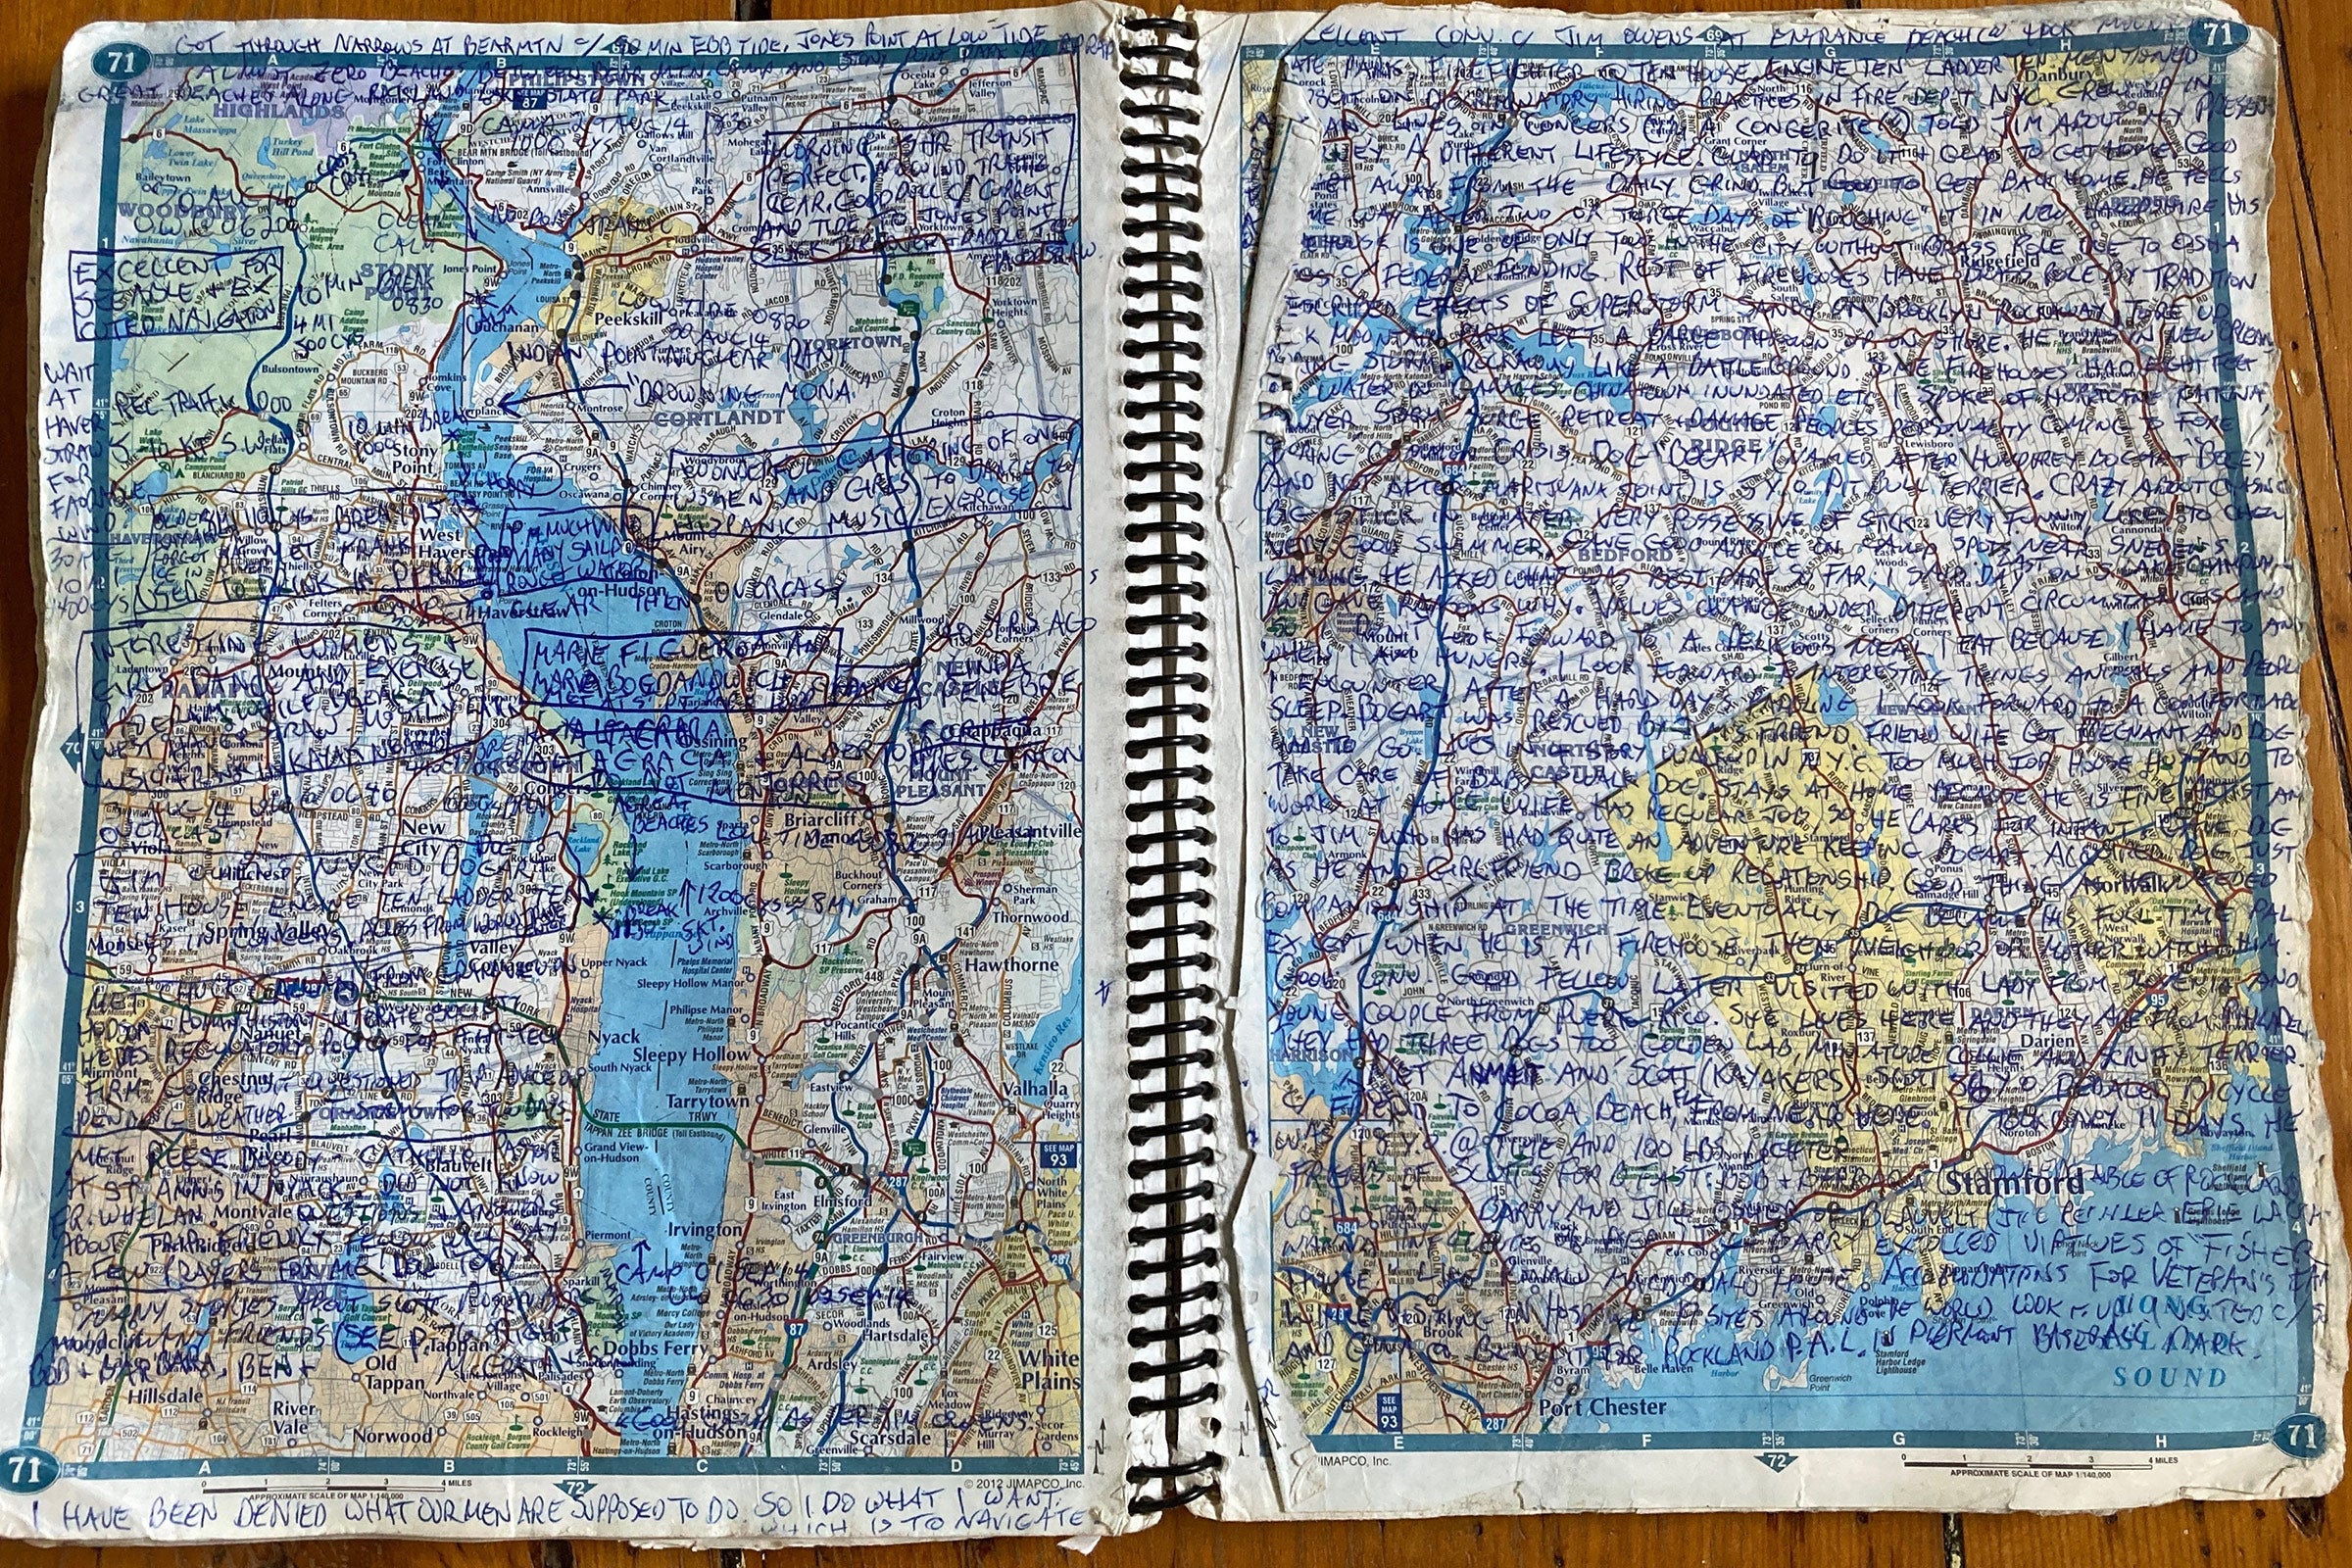 “I started keeping a regular journal, but I found that I was so tired at the end of the day,” Conant told me. Instead, he took extensive notes on the road atlases he used to navigate.